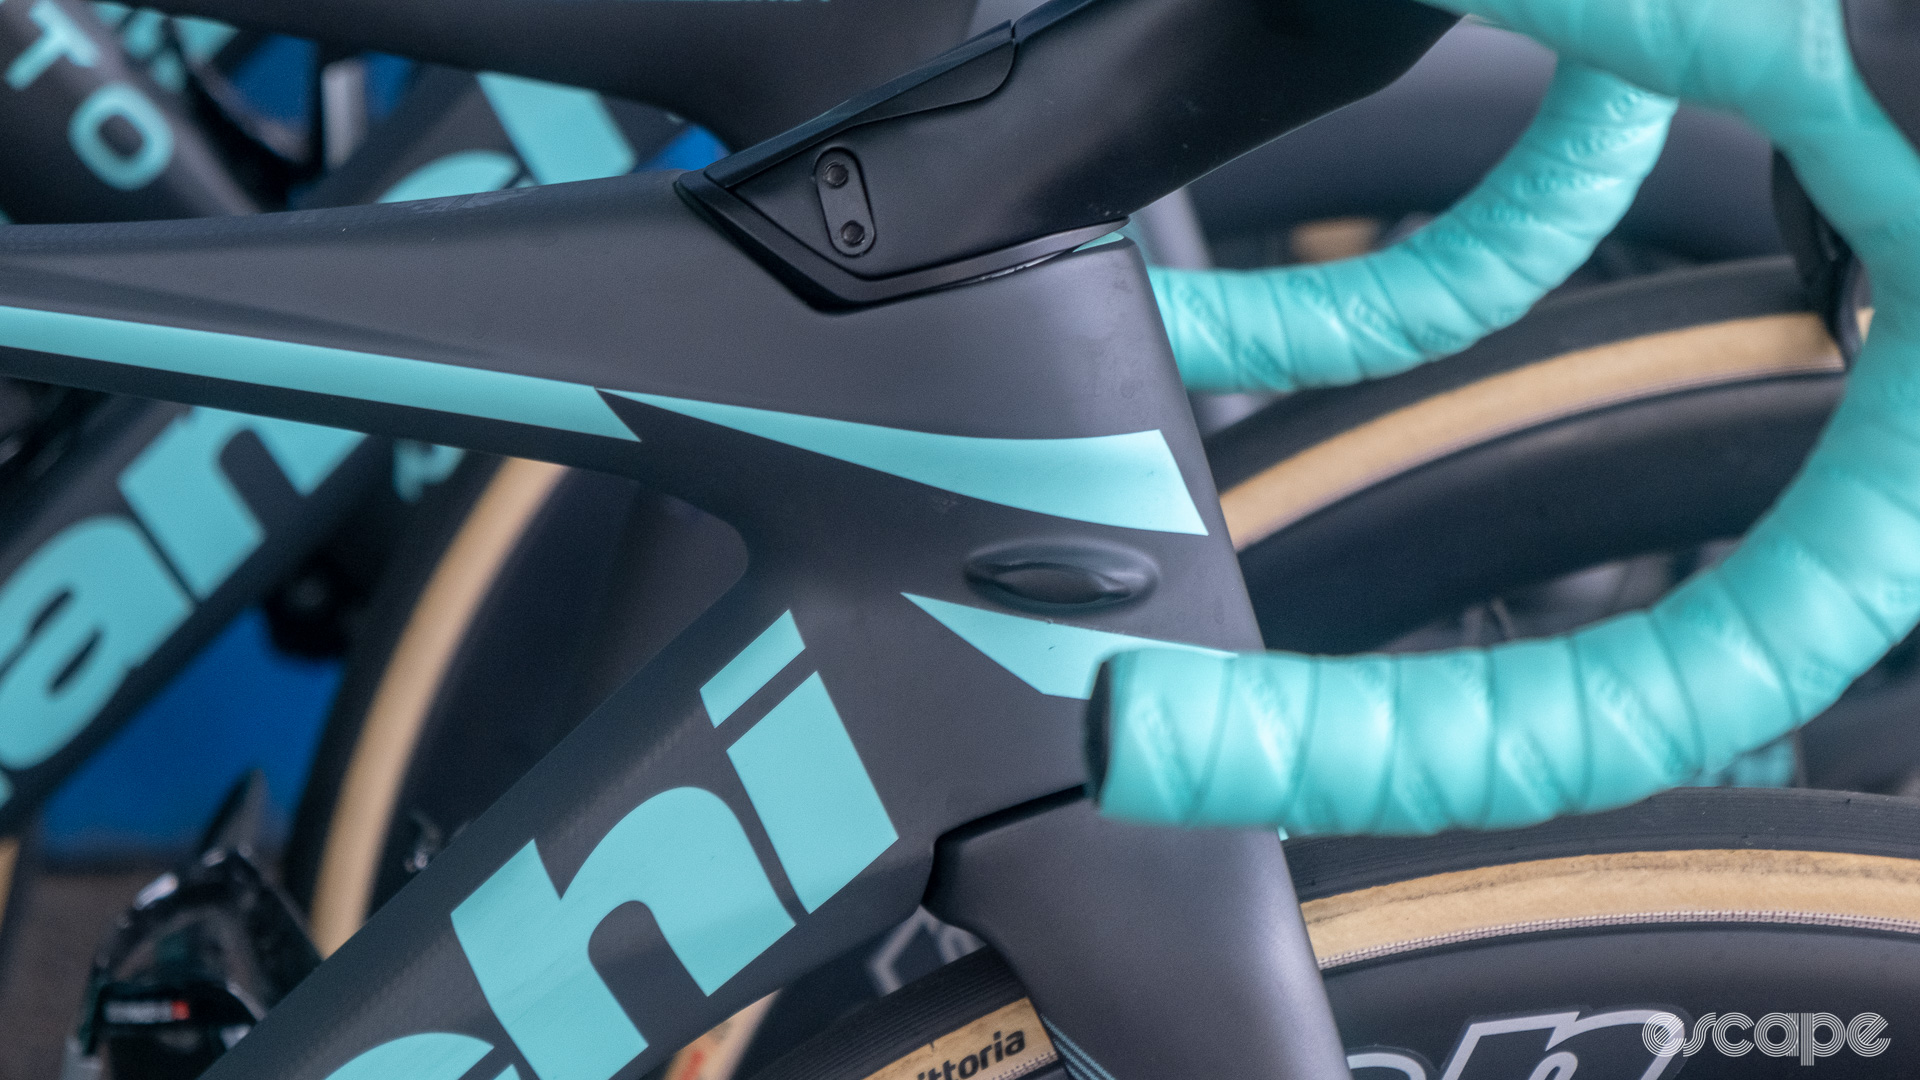 The image shows the head tube of a Bianchi Oltre XR4 from the side